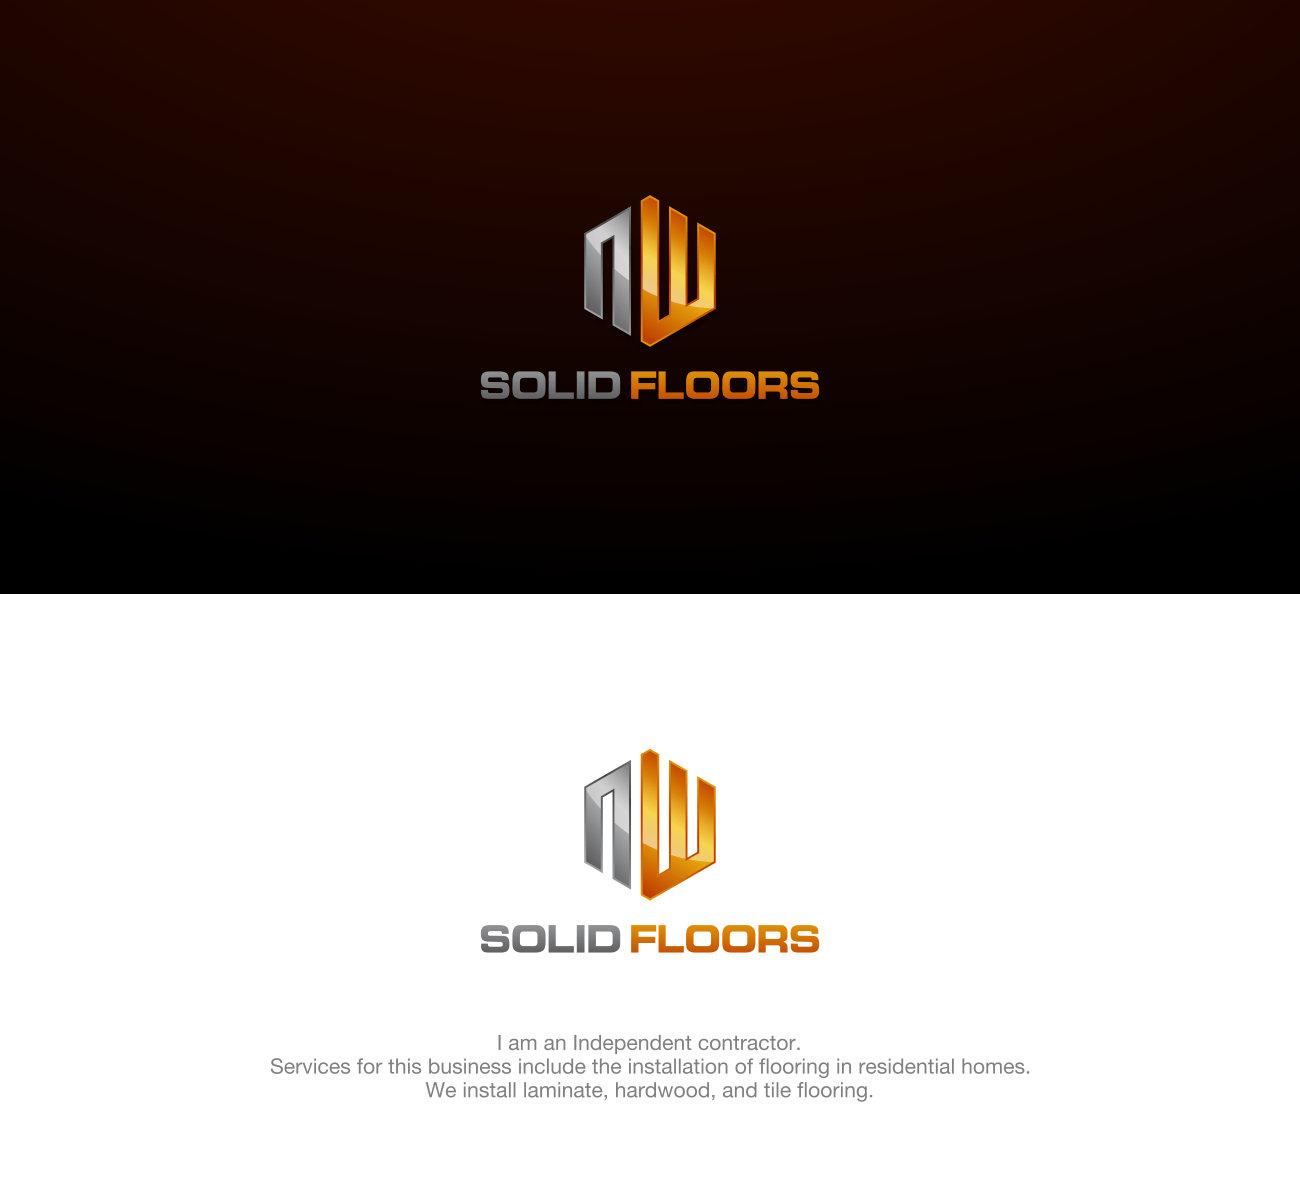 NW Logo - Modern Logo Designs. Flooring Logo Design Project for NW Solid